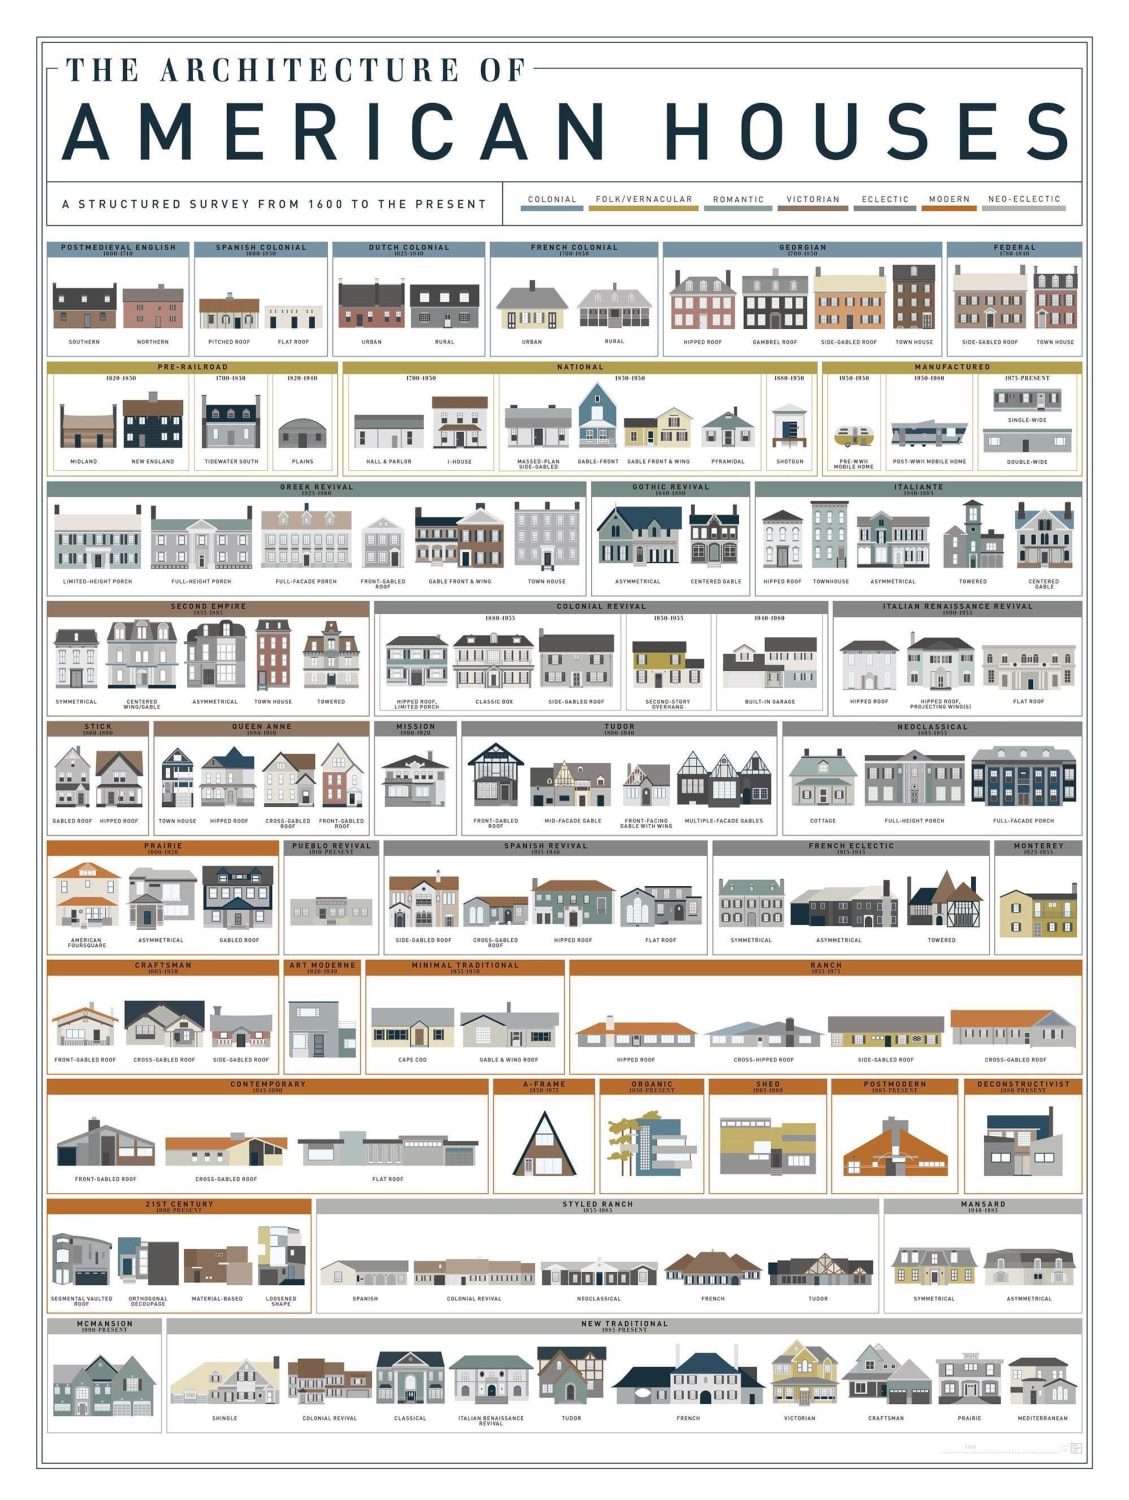 The architecture of American houses